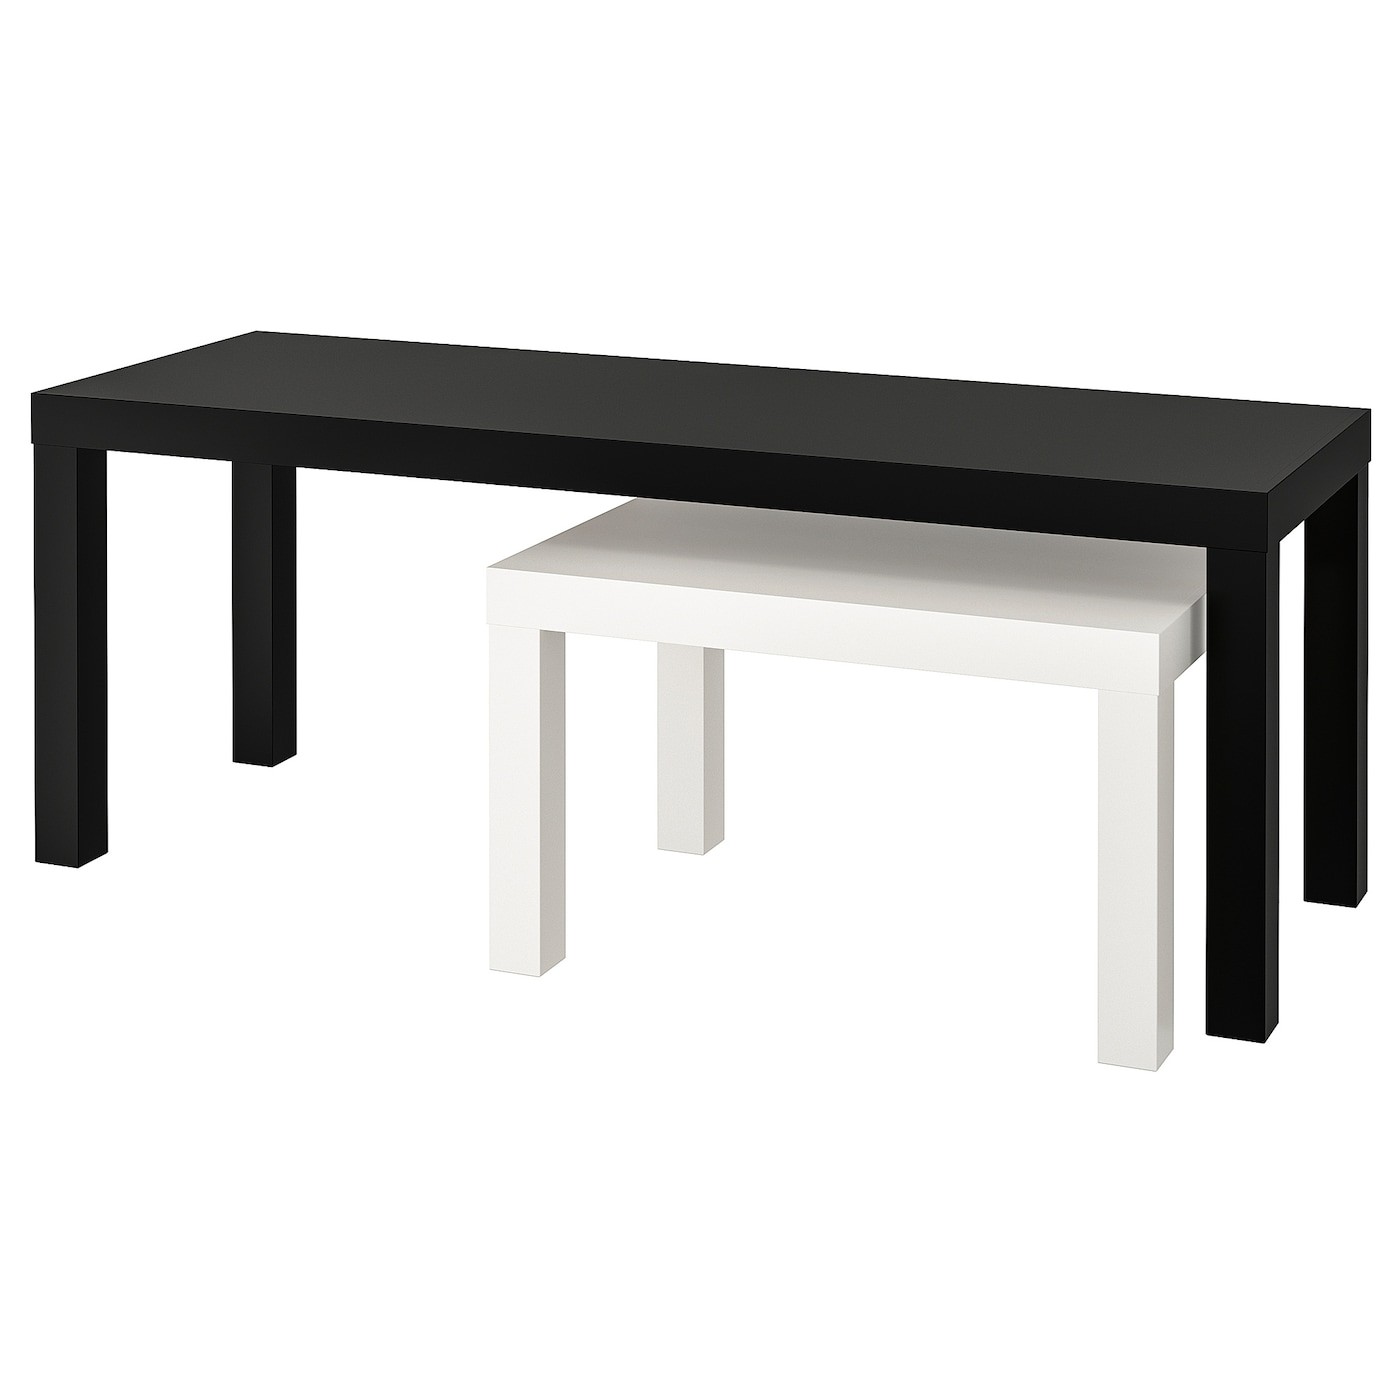 LACK Nest of tables, set of 2